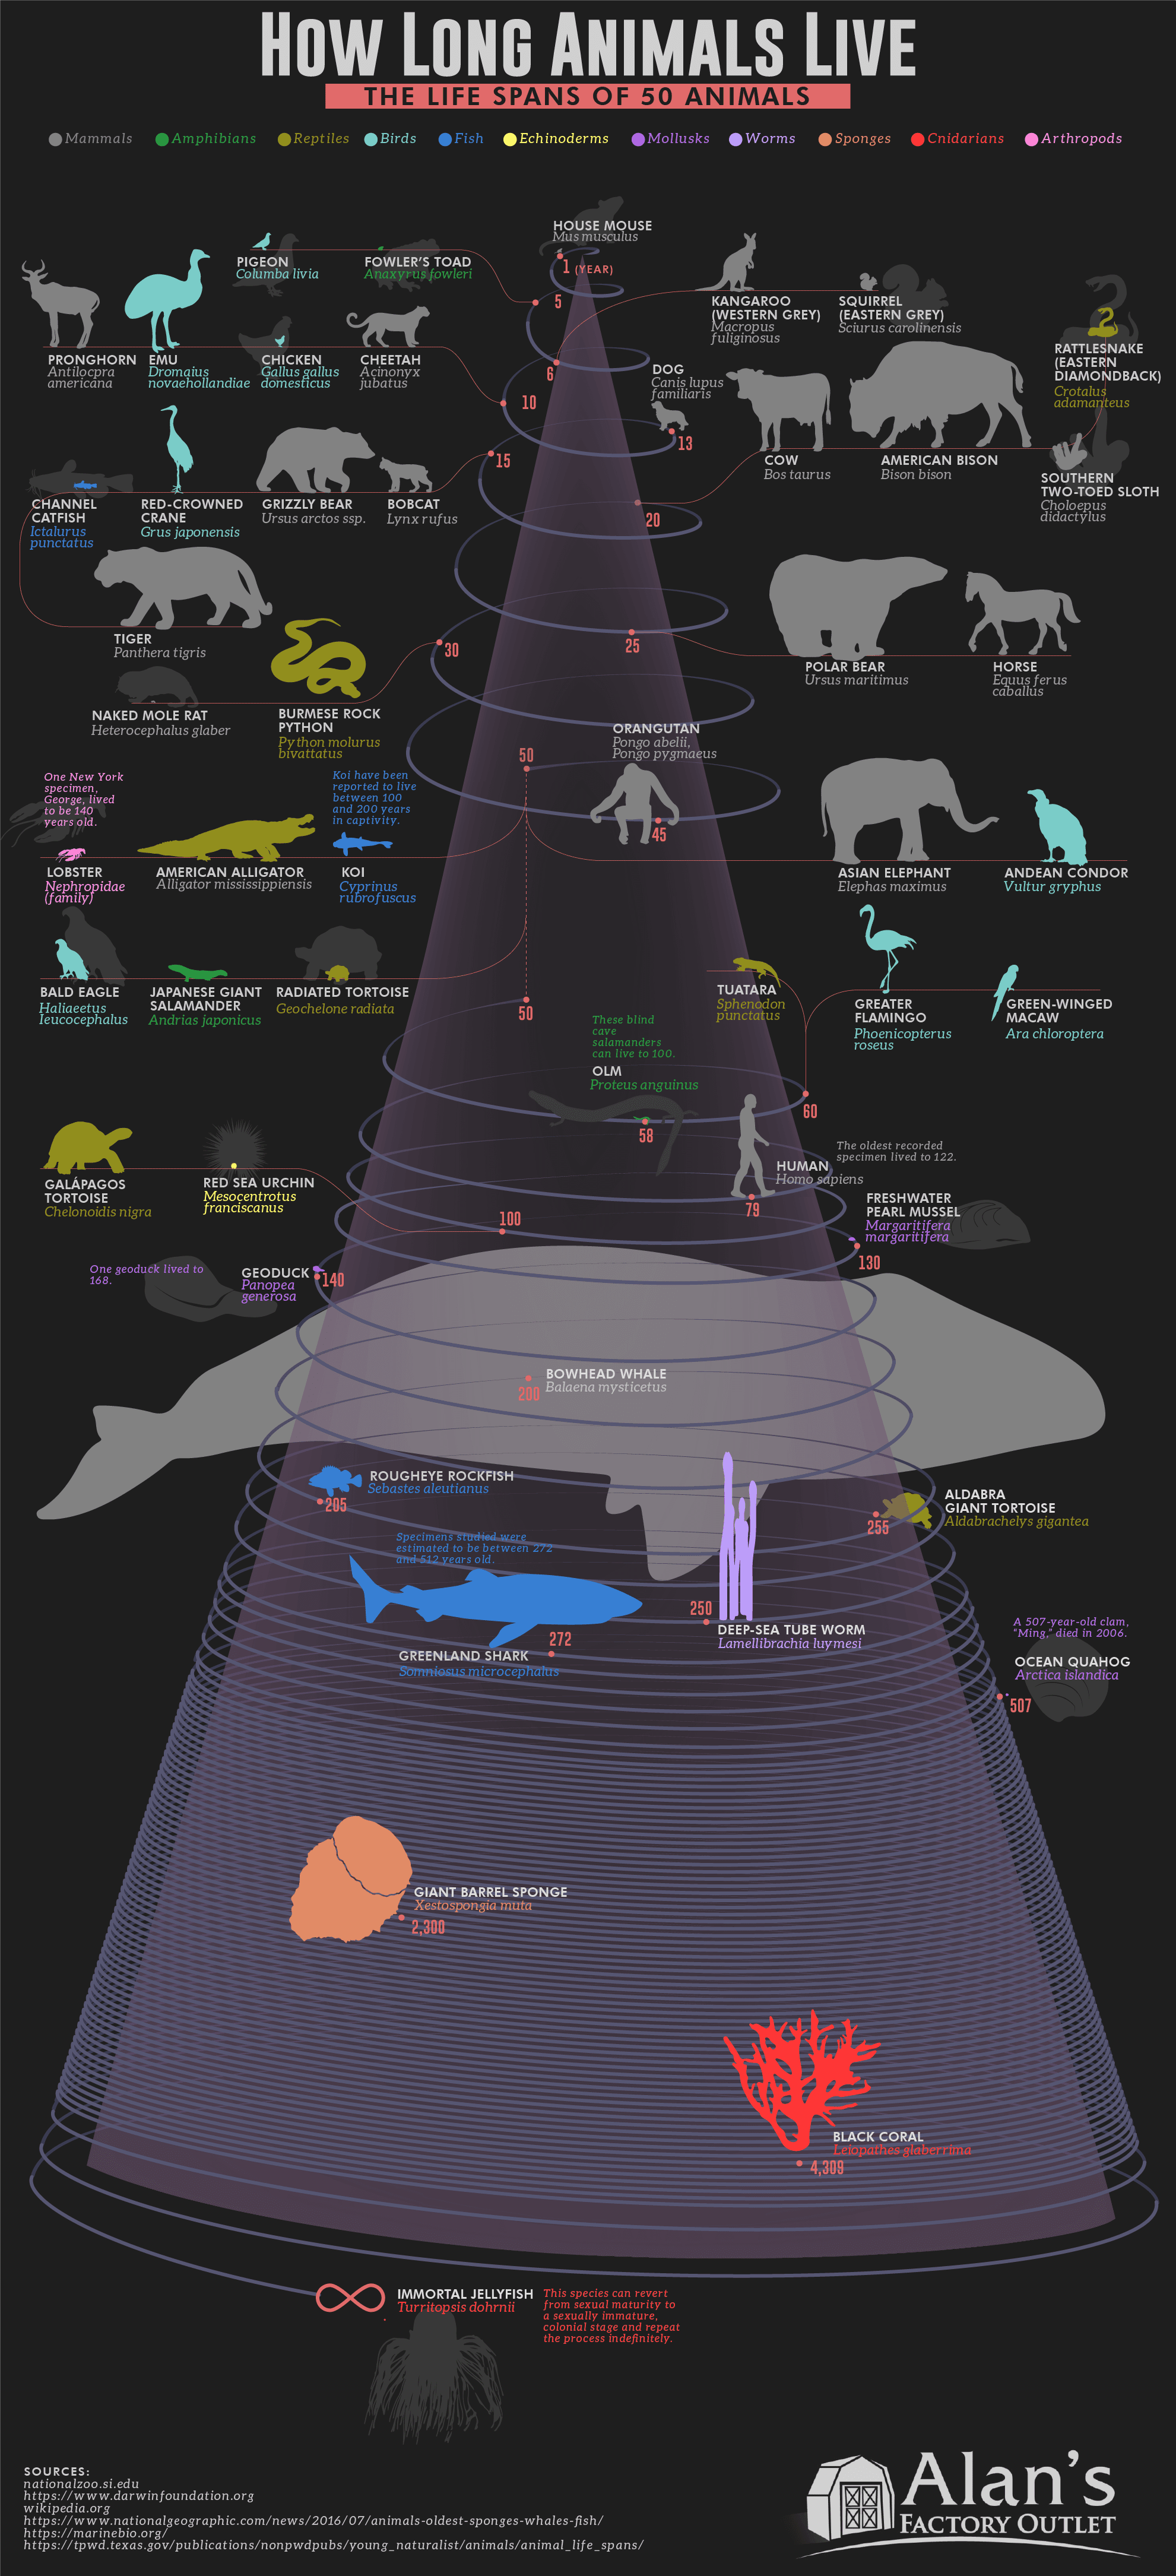 How Long Animals Live: The Life Spans of 50 Animals - AlansFactoryOutlet.com - Infographic